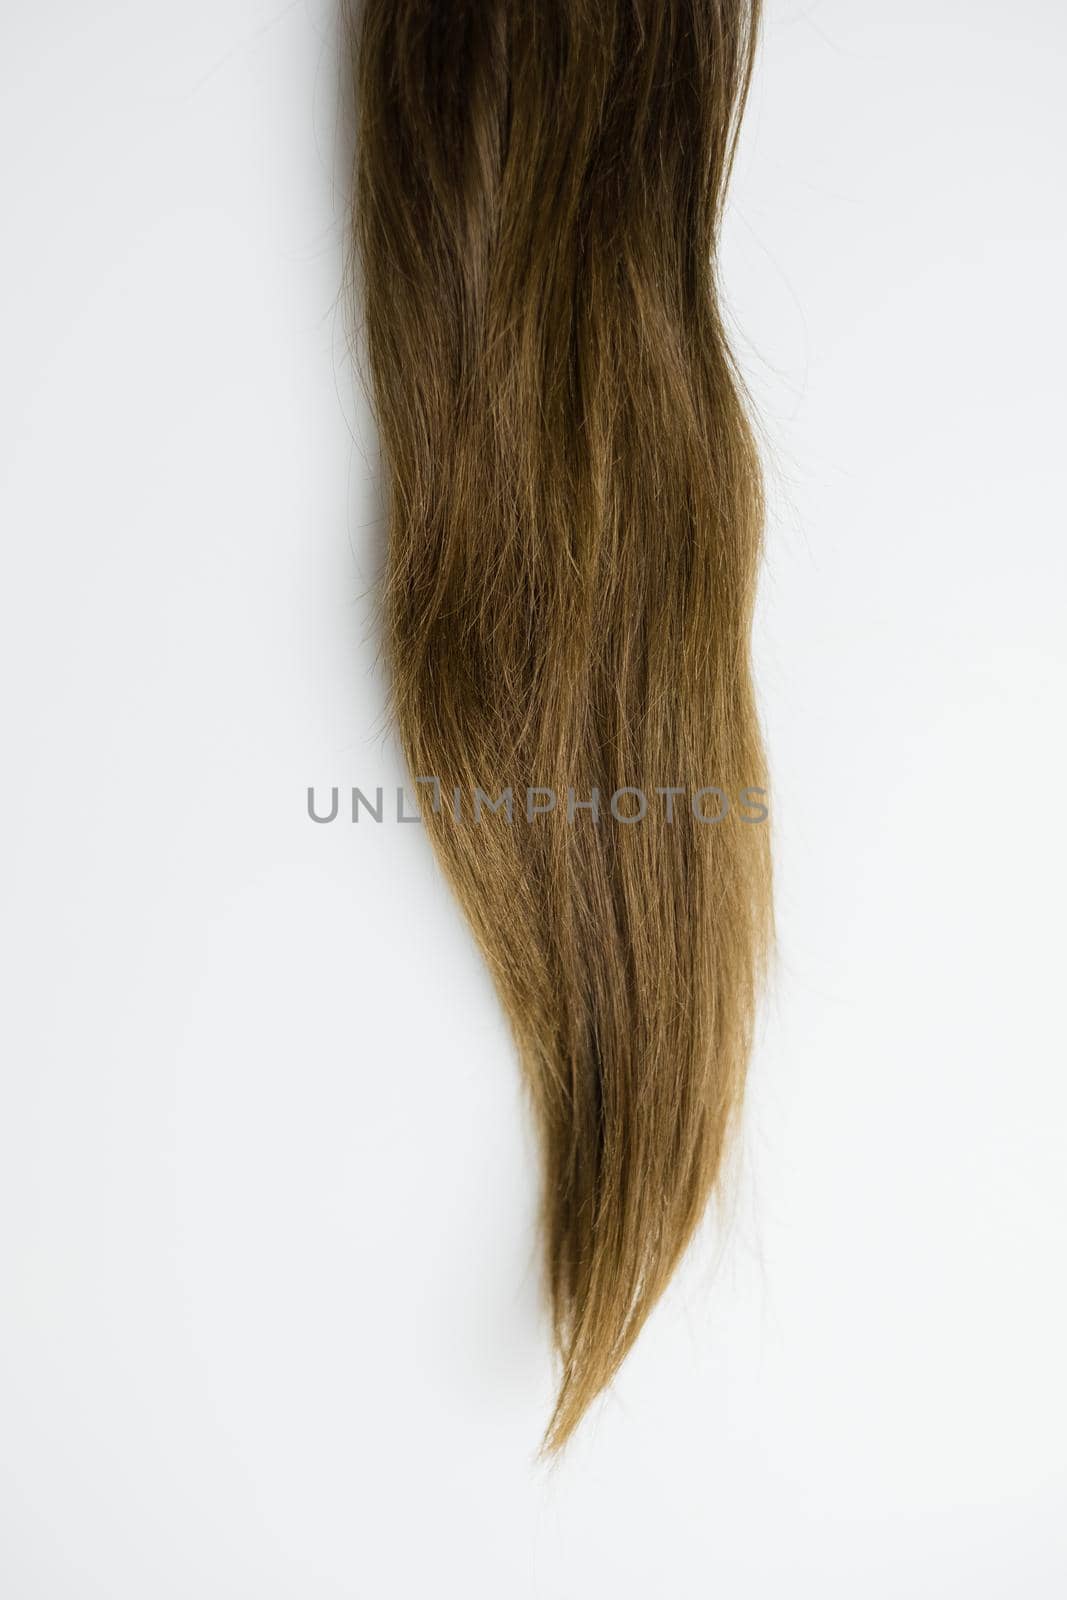 Women's long hair on a white background by Gleaminvisible